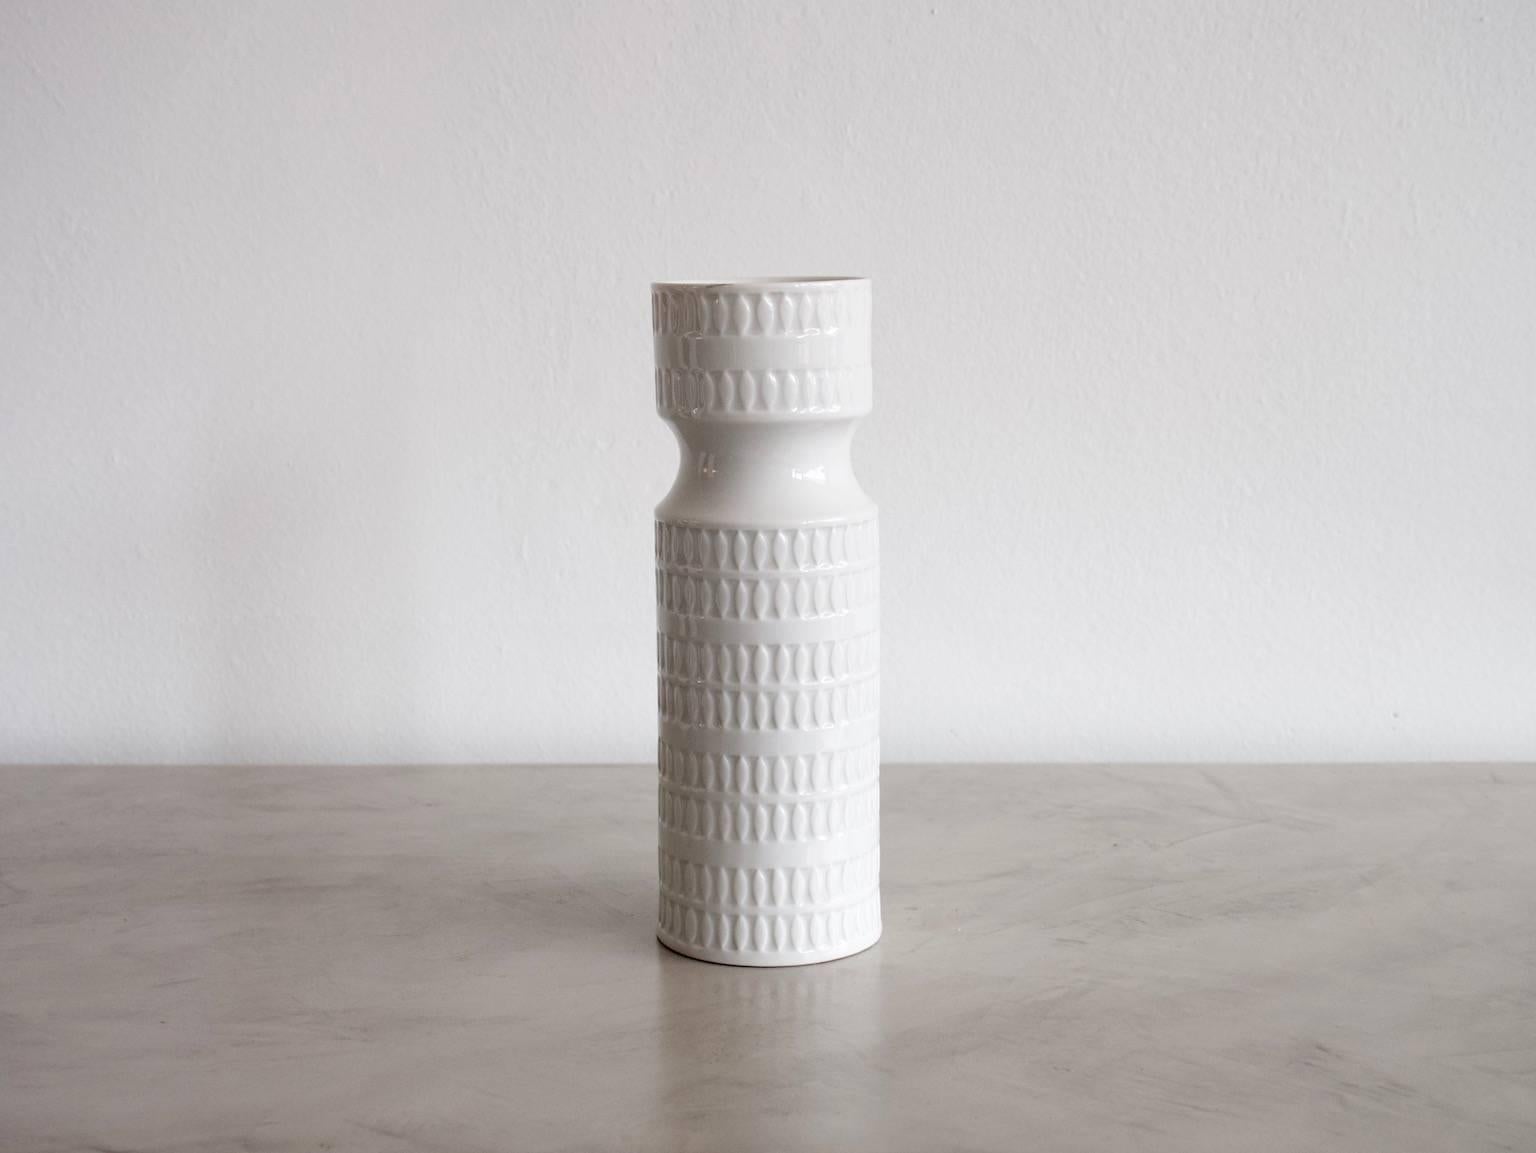 Tall tower-like white porcelain vase with a relief finish. Manufactured and marked on the bottom by Hutschenreuther, circa 1970s.